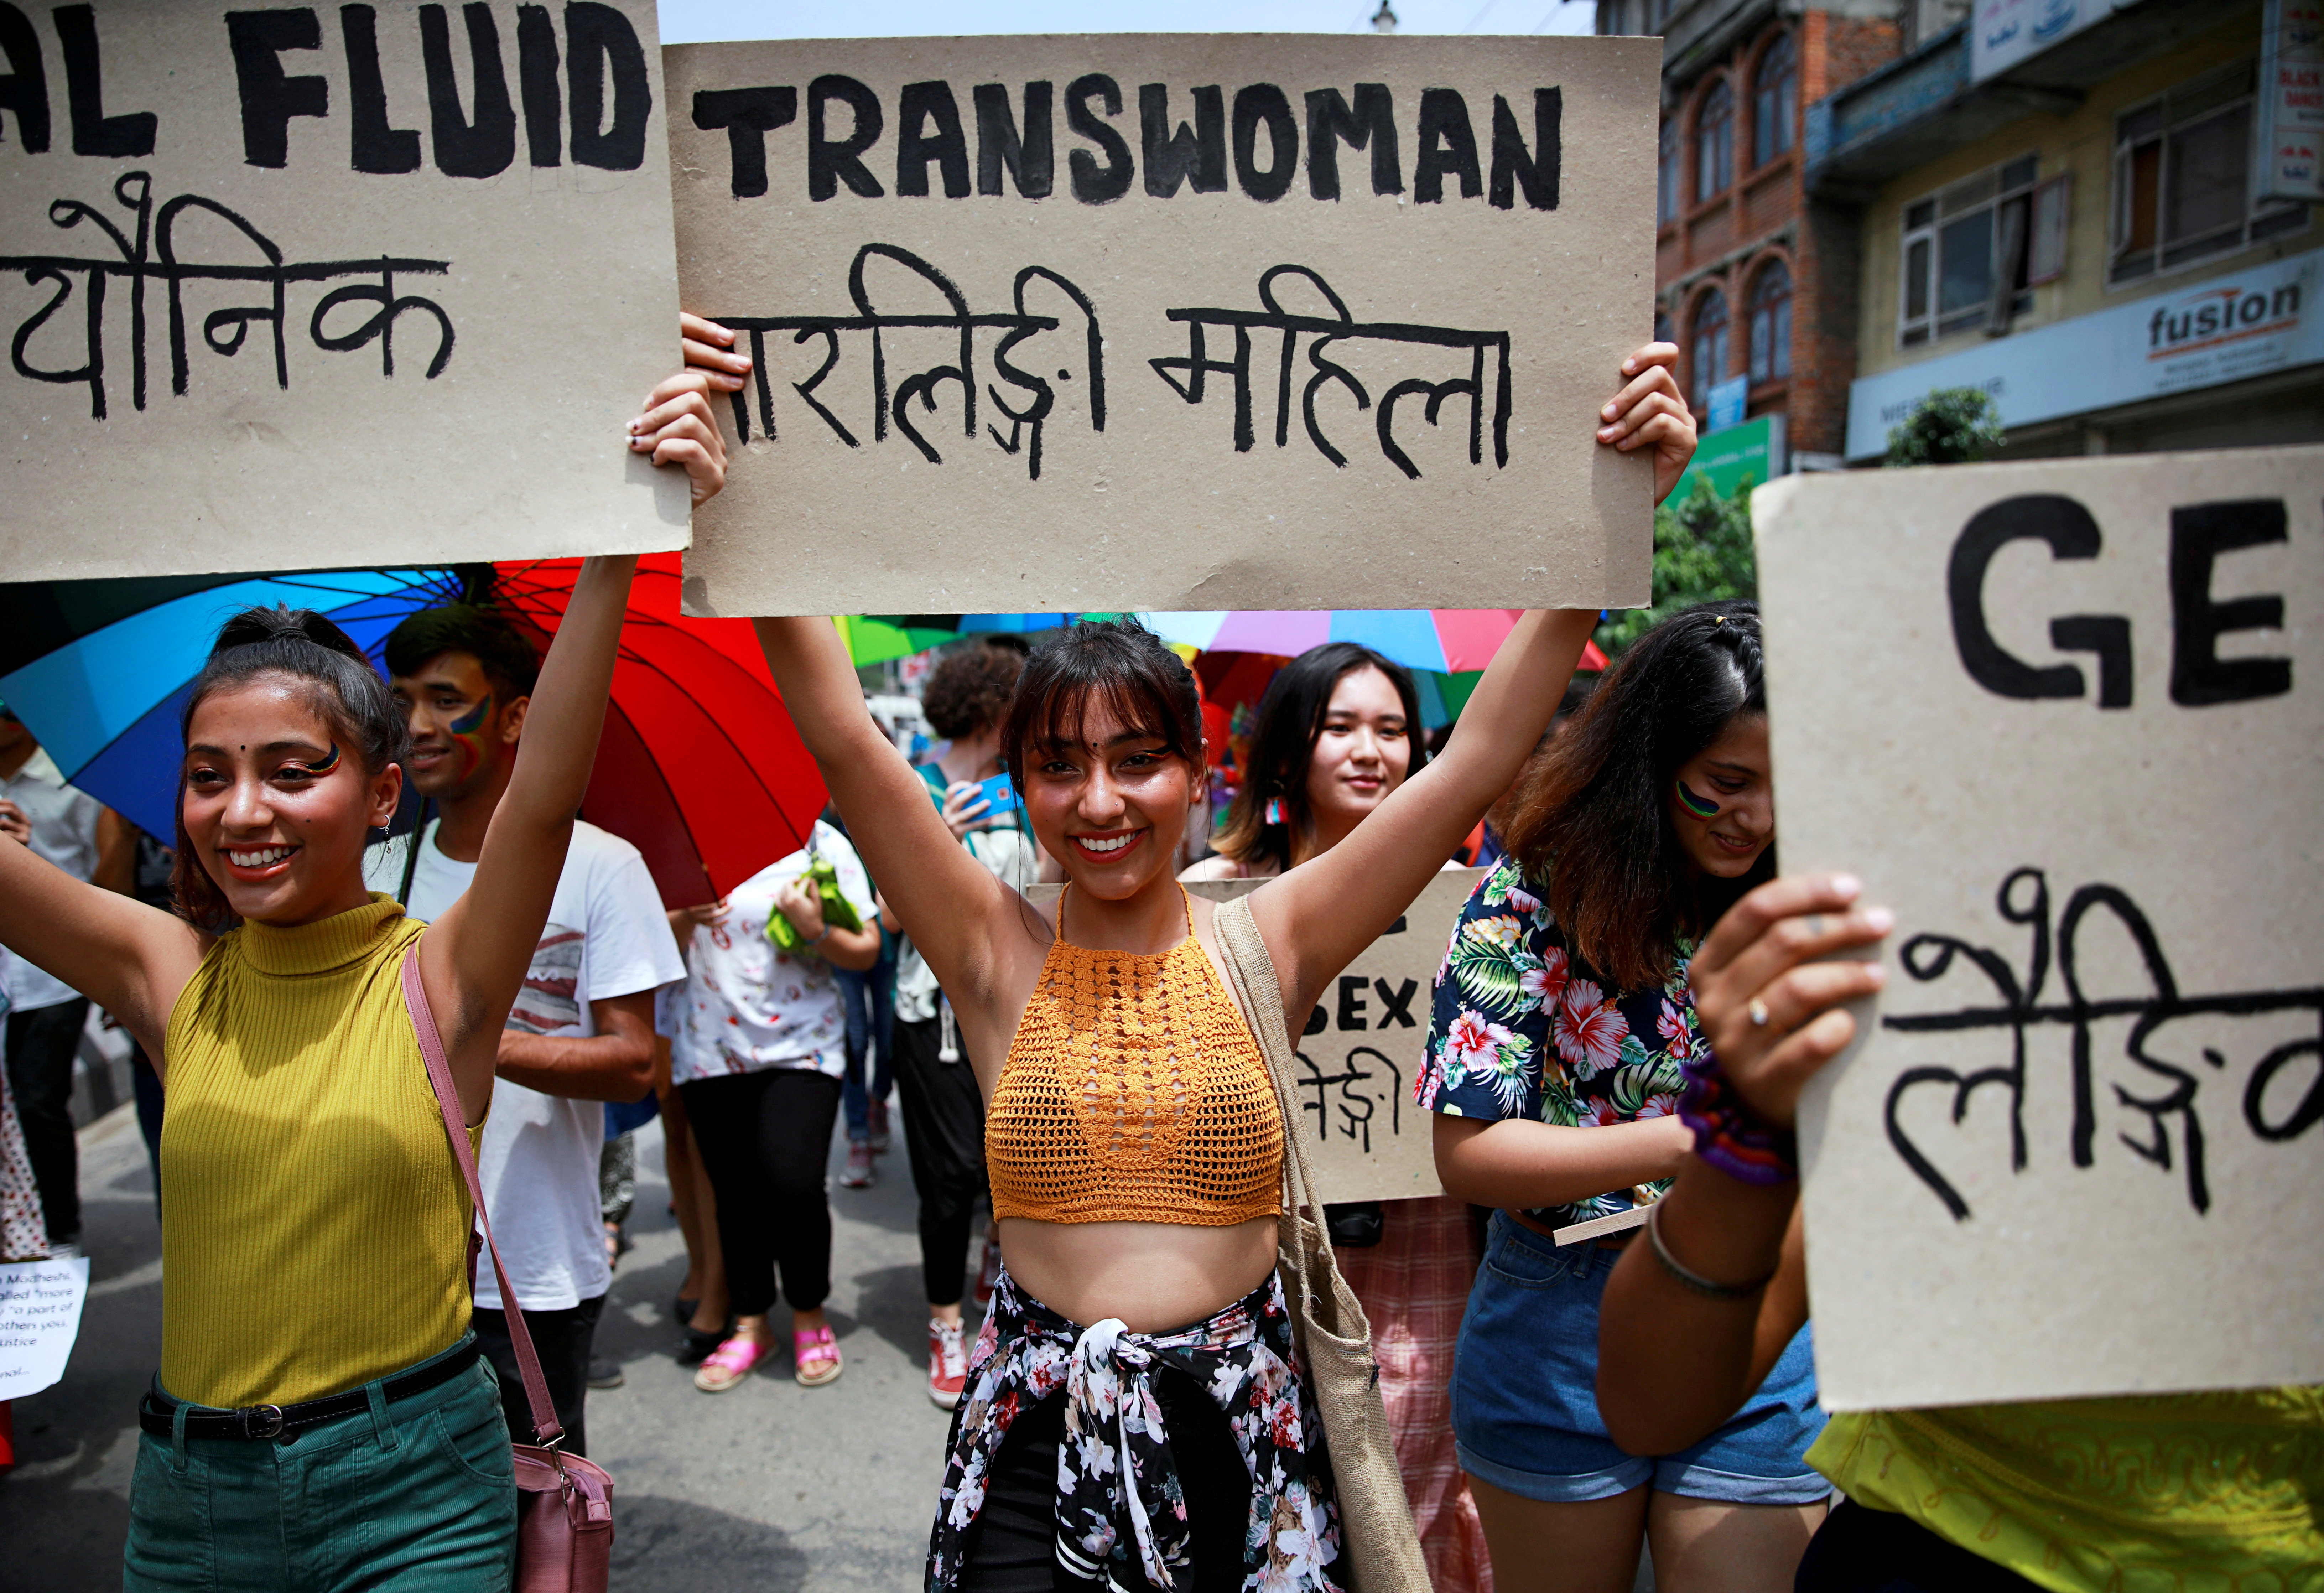 Participants hold up placards while taking part in a Gay Pride parade to mark pride month in Kathmandu